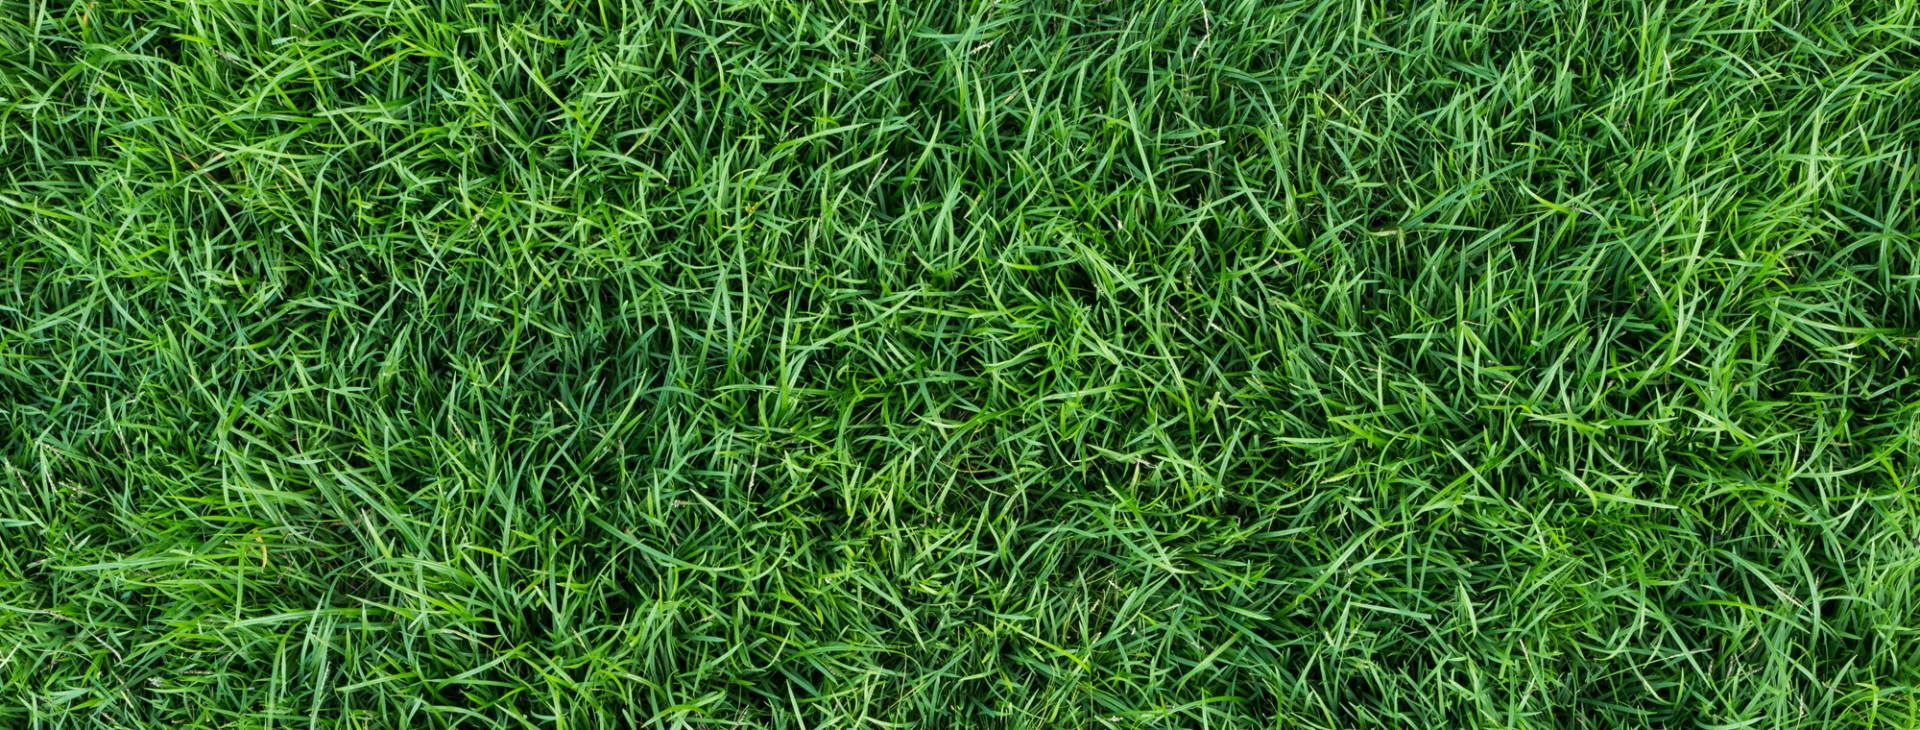 KEEPING YOUR LAWN<br />
GREEN AND CLEAN